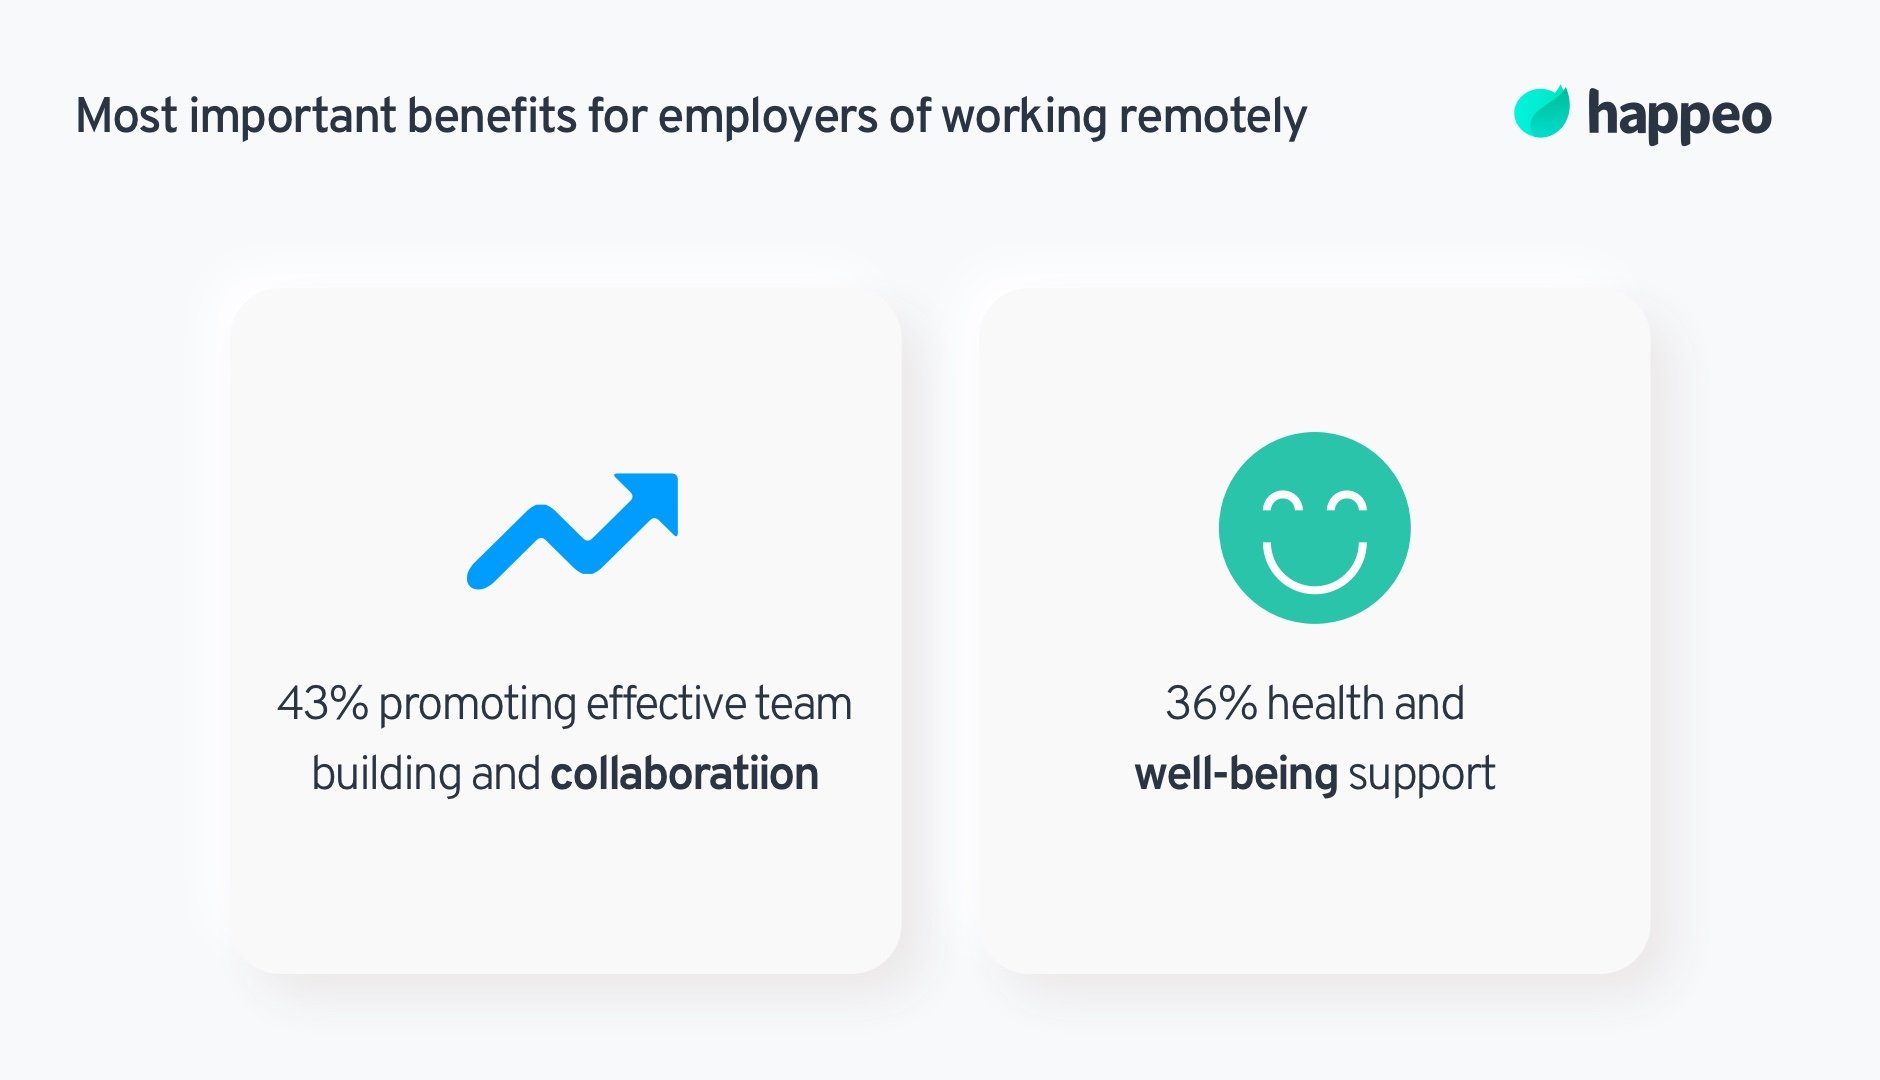 collaboration and remote work benefits